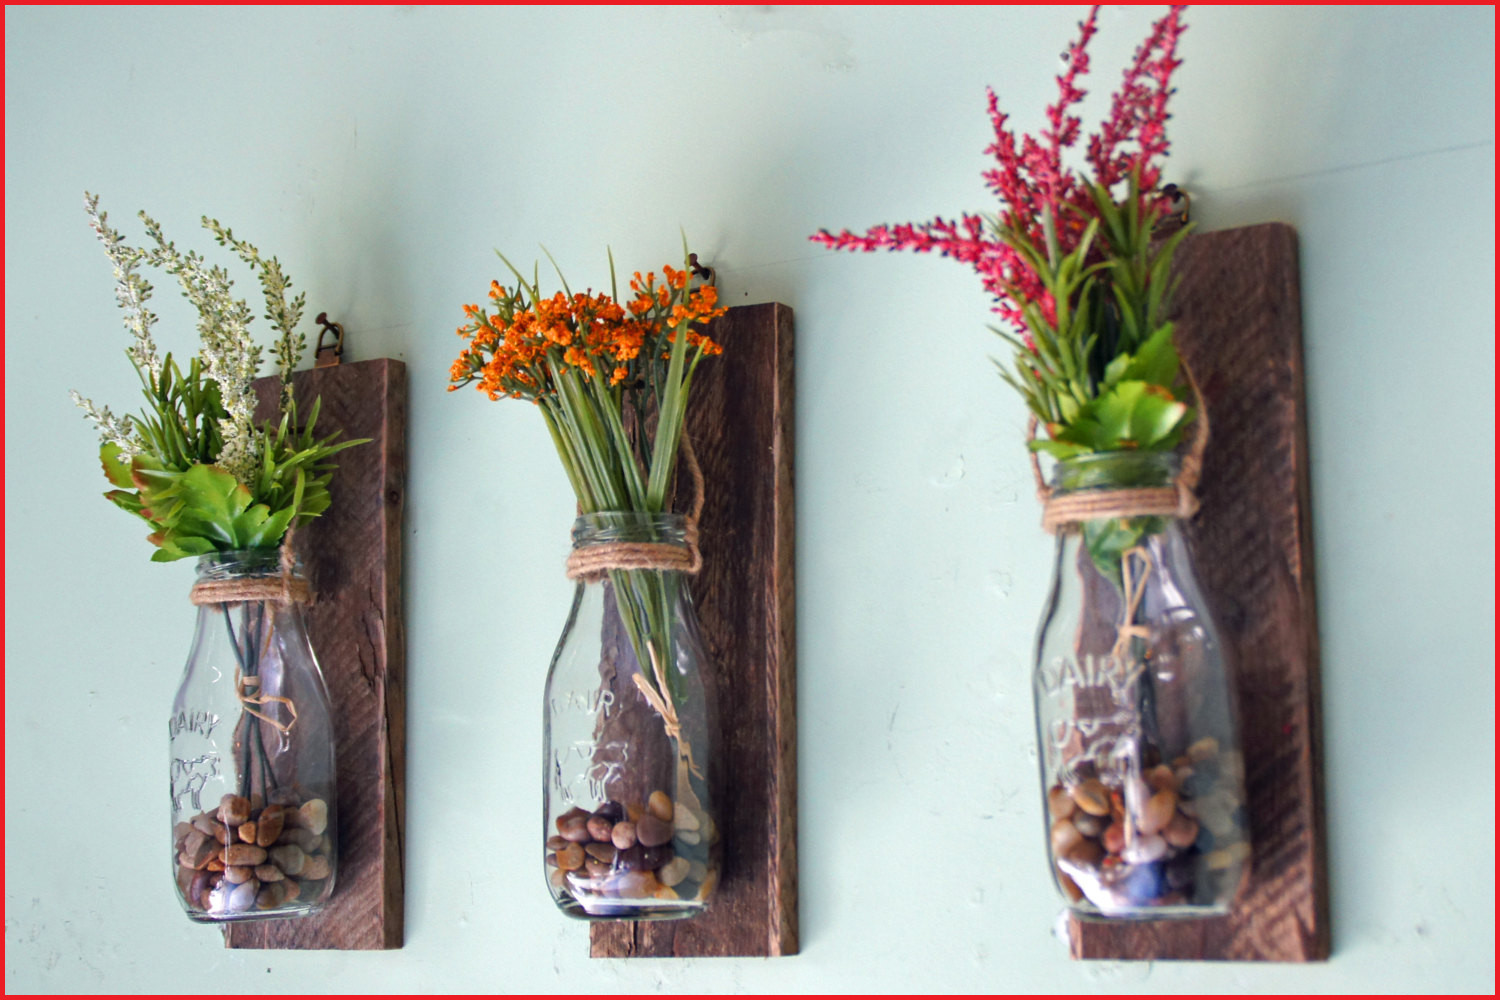 10 Amazing Diy Wall Mounted Vase 2024 free download diy wall mounted vase of wall mounted glass vases www topsimages com for wall mounted vases font wall mounted hanging clear glass vases flower pare design of wall mounted